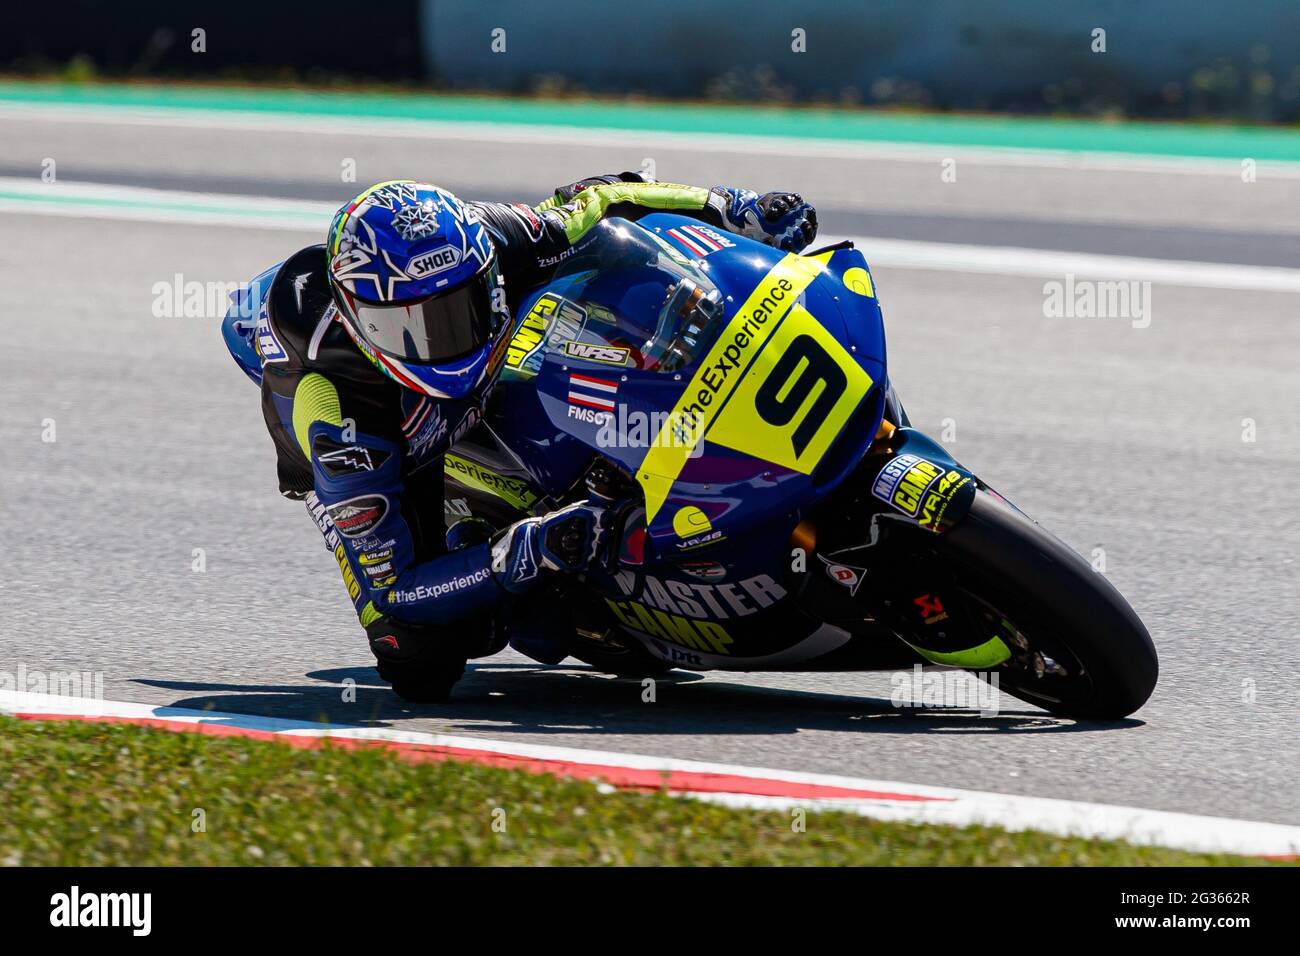 Montmelo, Barcelona, Spain. 13th June, 2021. Keminth Kubo from Thailand,  rider of Vr46 Master Camp Team with Kalex during the Moto 2 race of FIM CEV  Repsol Barcelona in Circuit Barcelona-Catalunya. Credit: